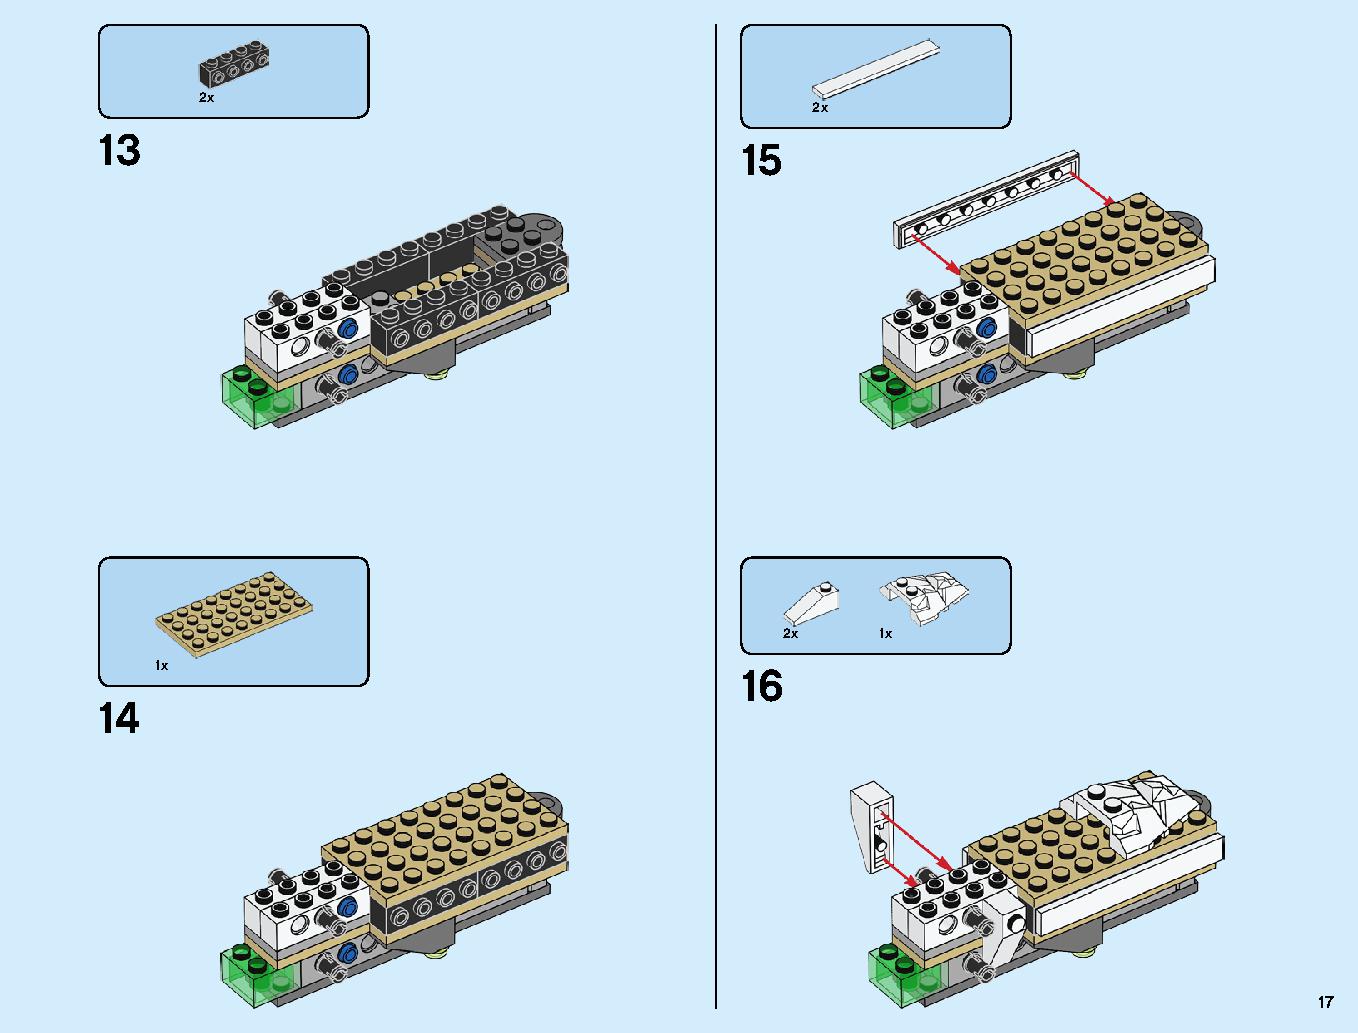 The Ultra Dragon 70679 LEGO information LEGO instructions 17 page